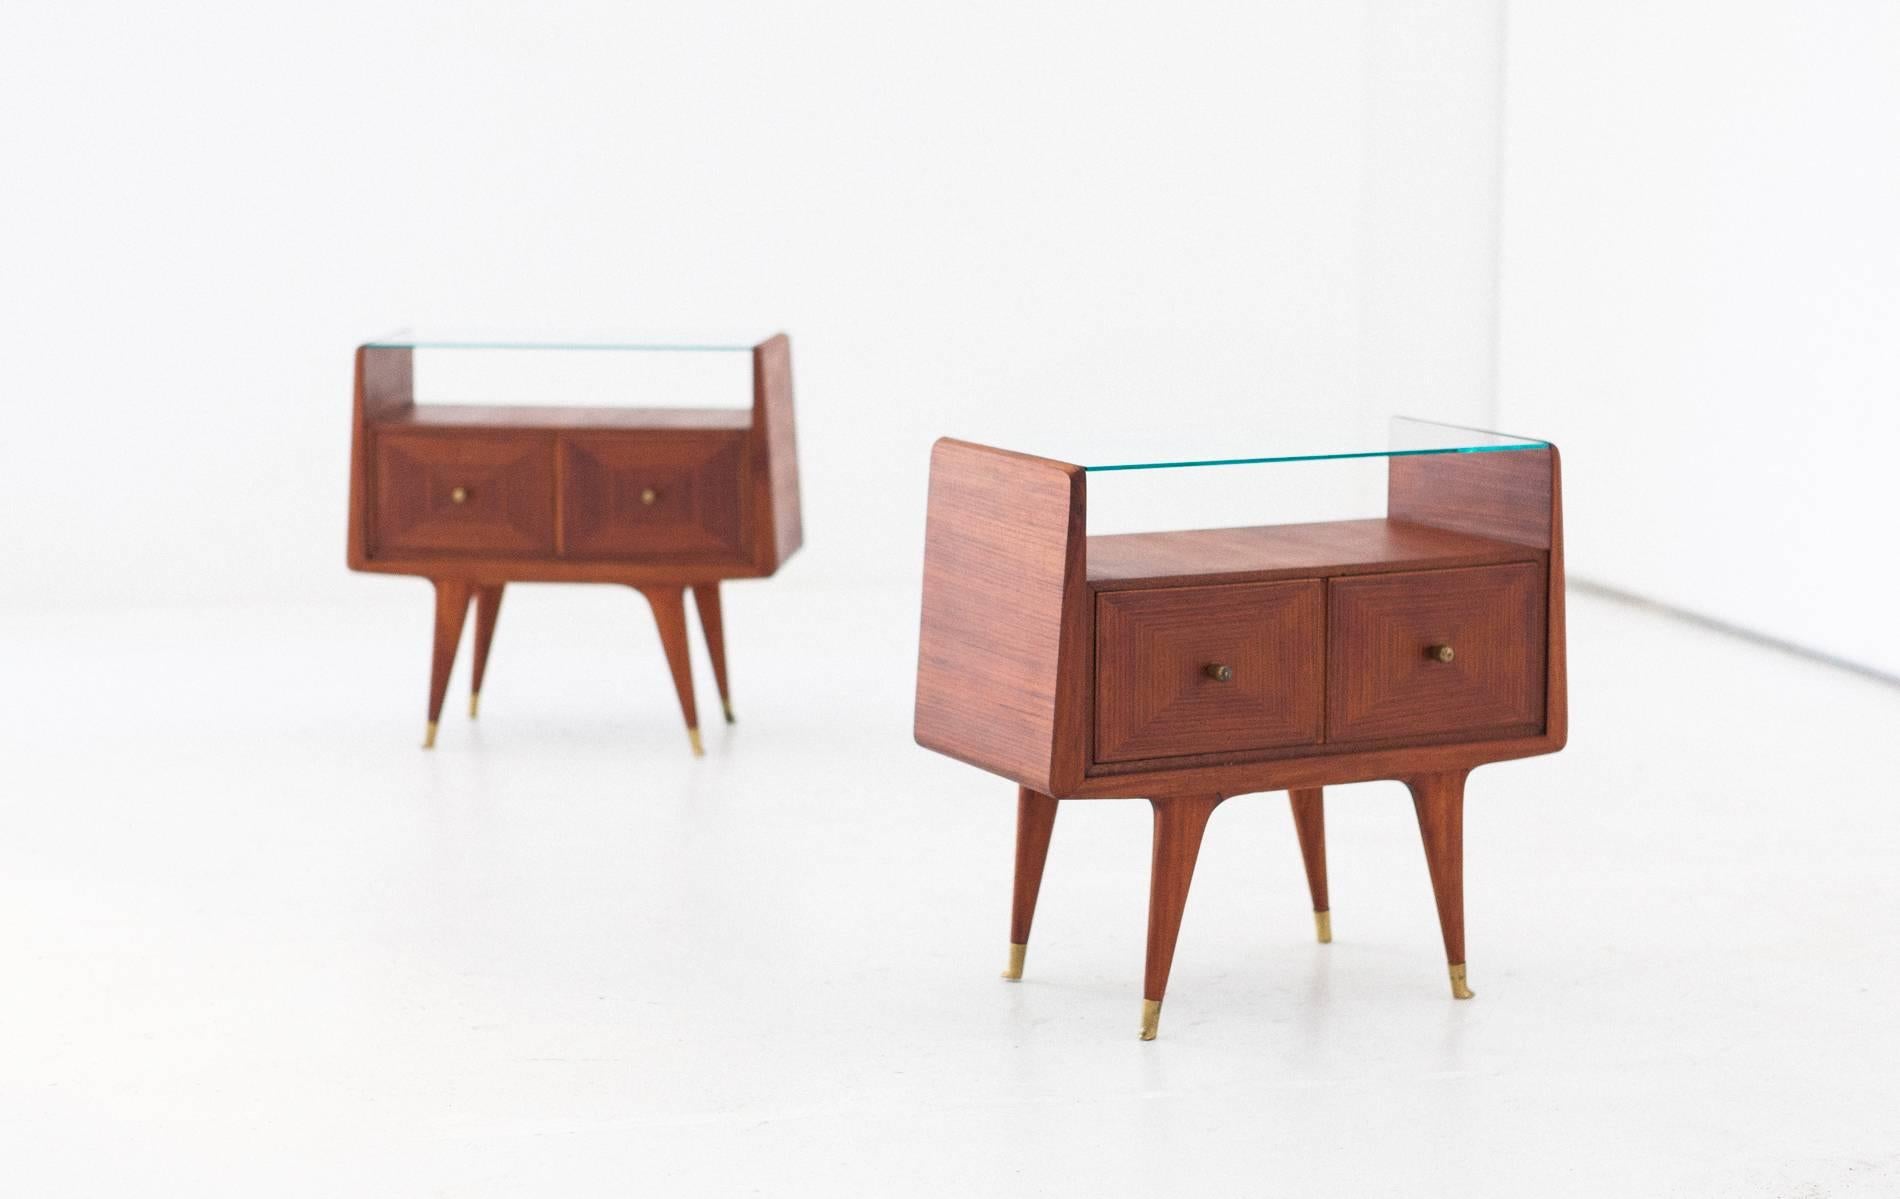 Glass Italian Mid-Century Modern Brass and Mahogany Bedside Tables Nightstands, 1950s